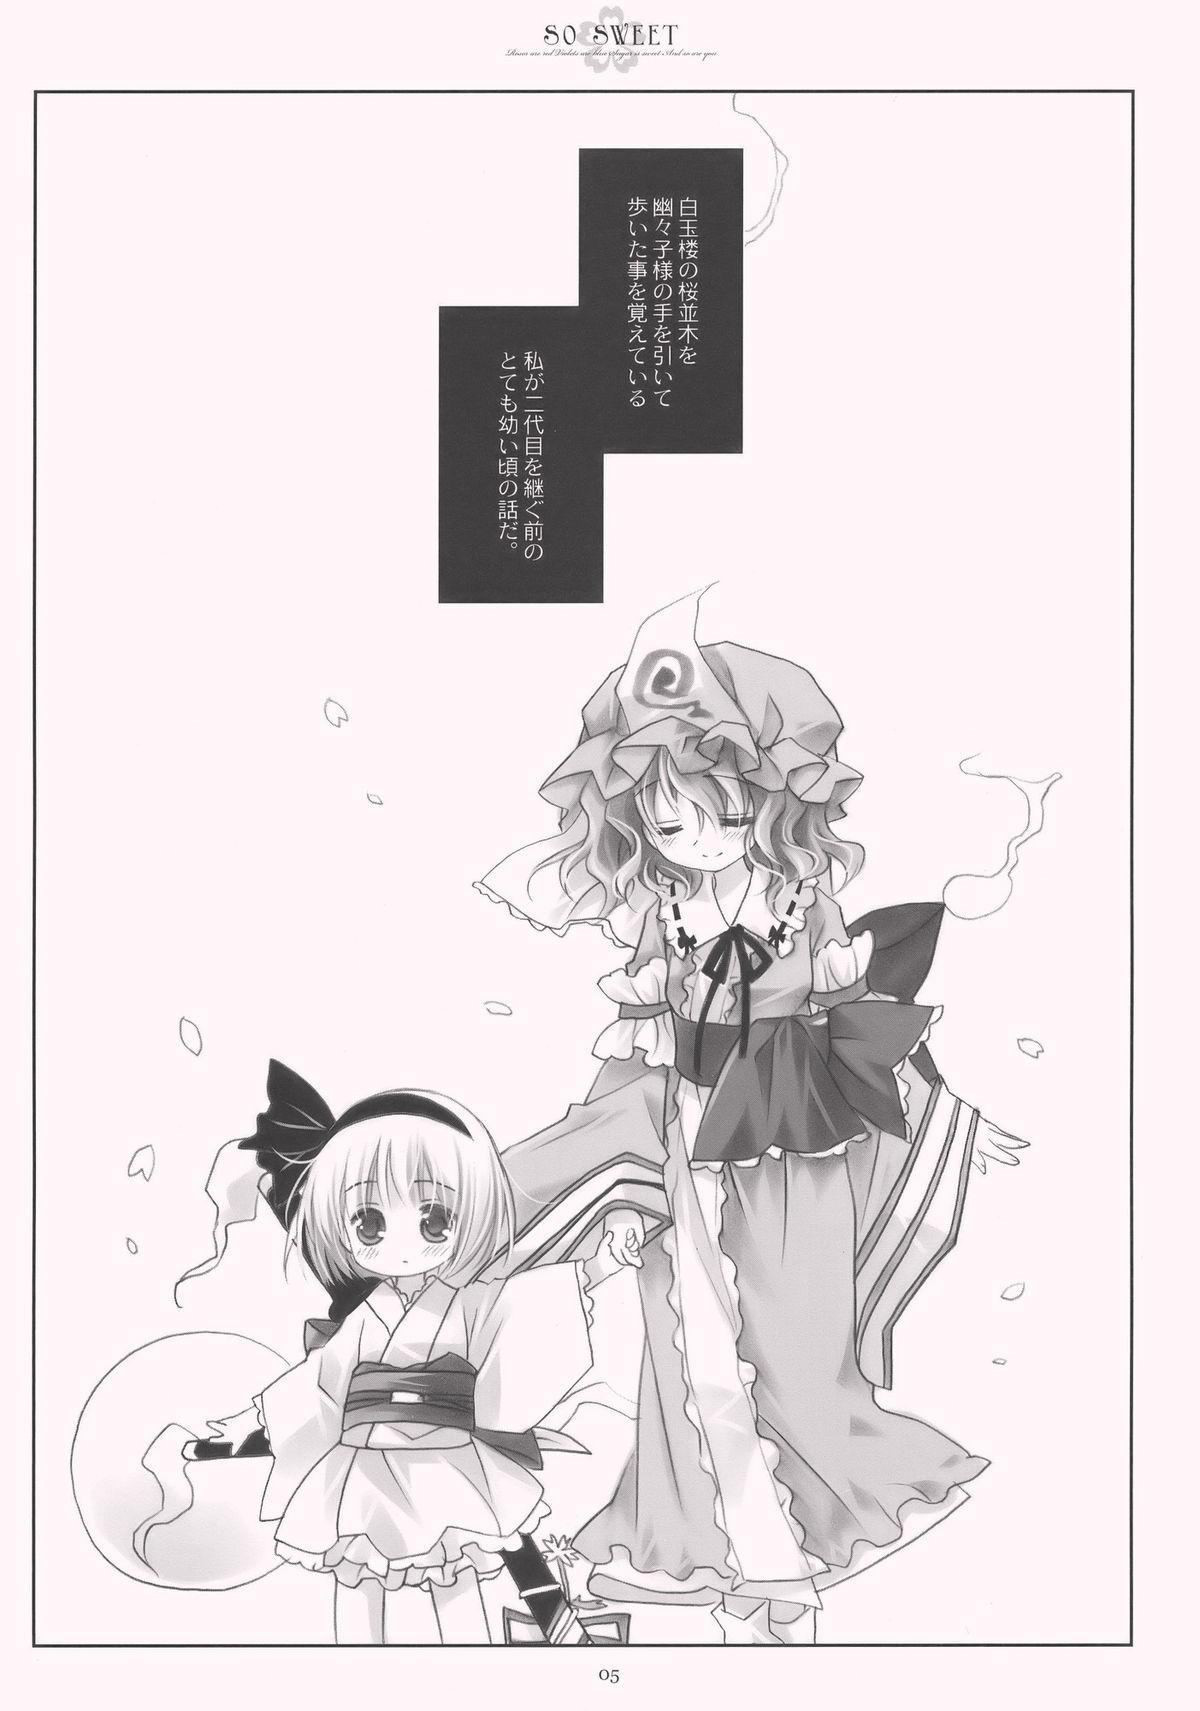 Buttfucking SO SWEET - Touhou project Best Blowjobs - Page 5